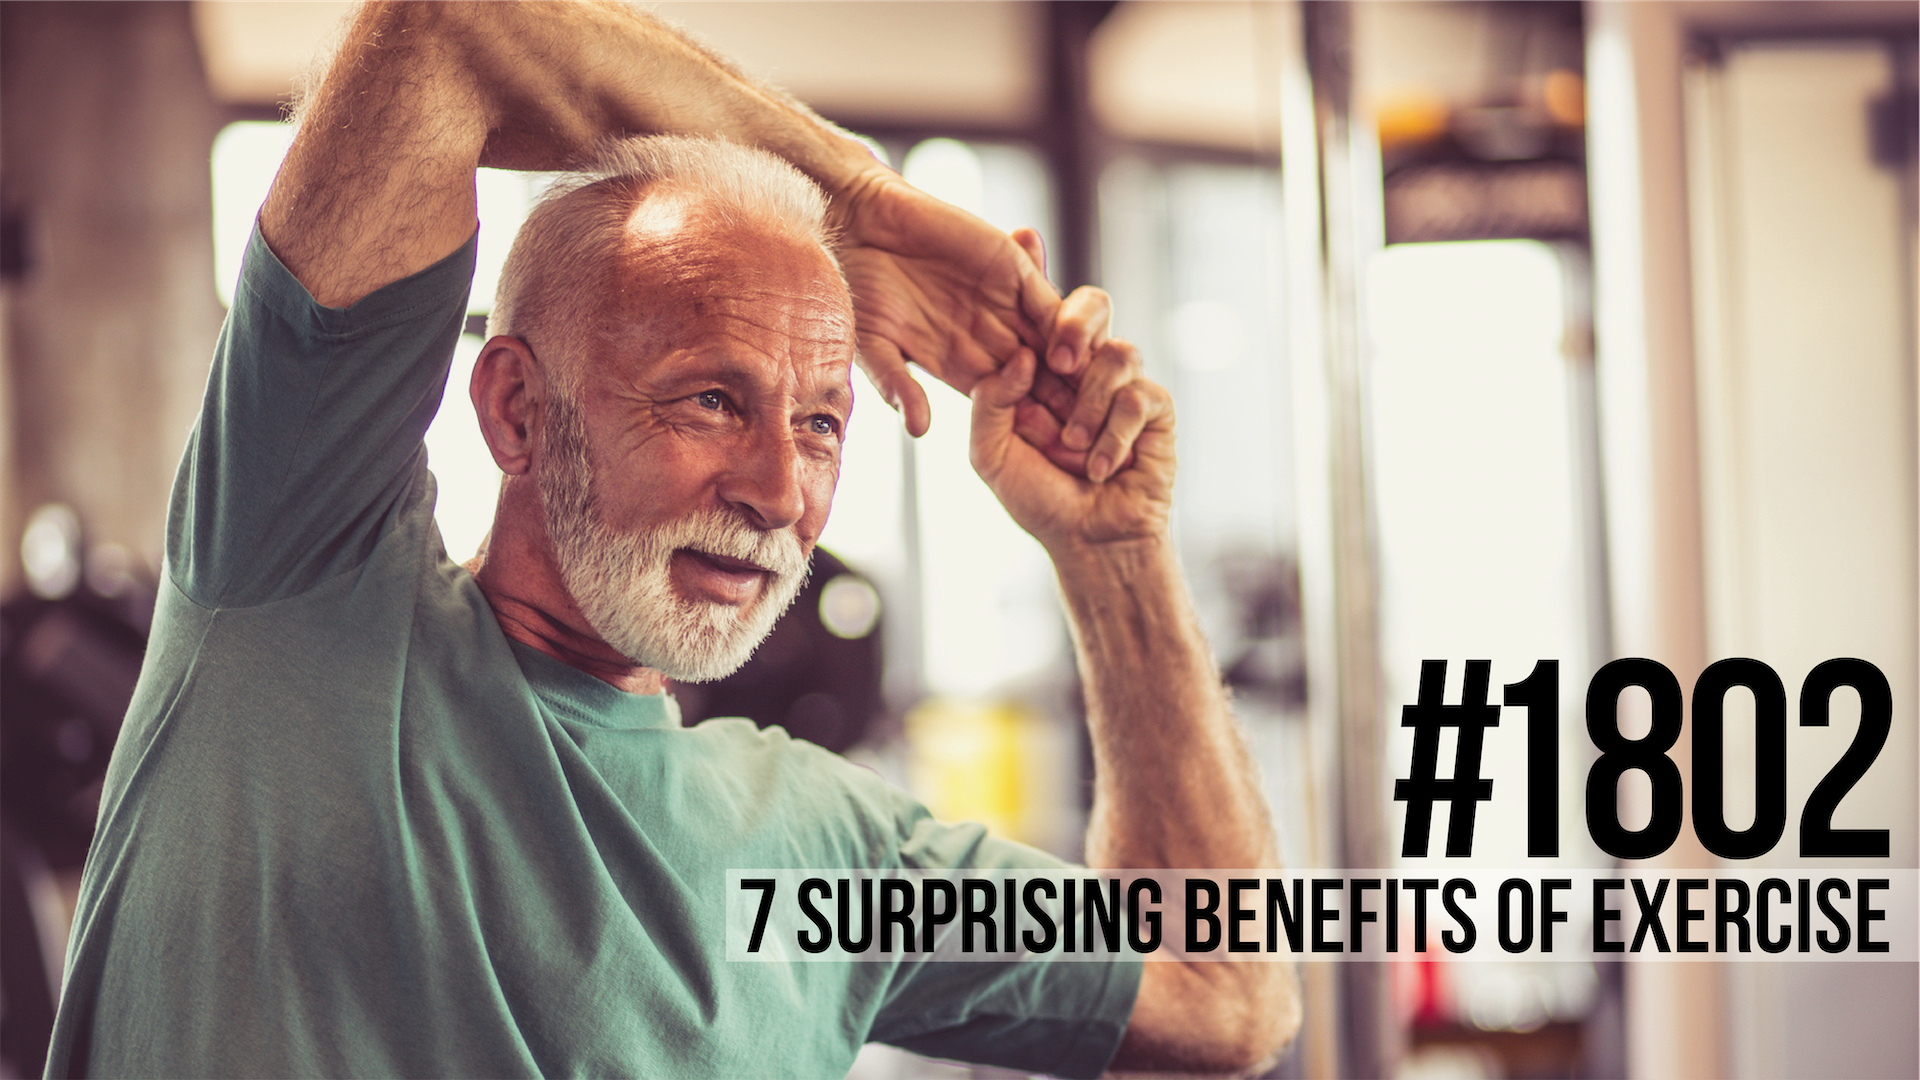 1802: Seven Surprising Benefits of Exercise